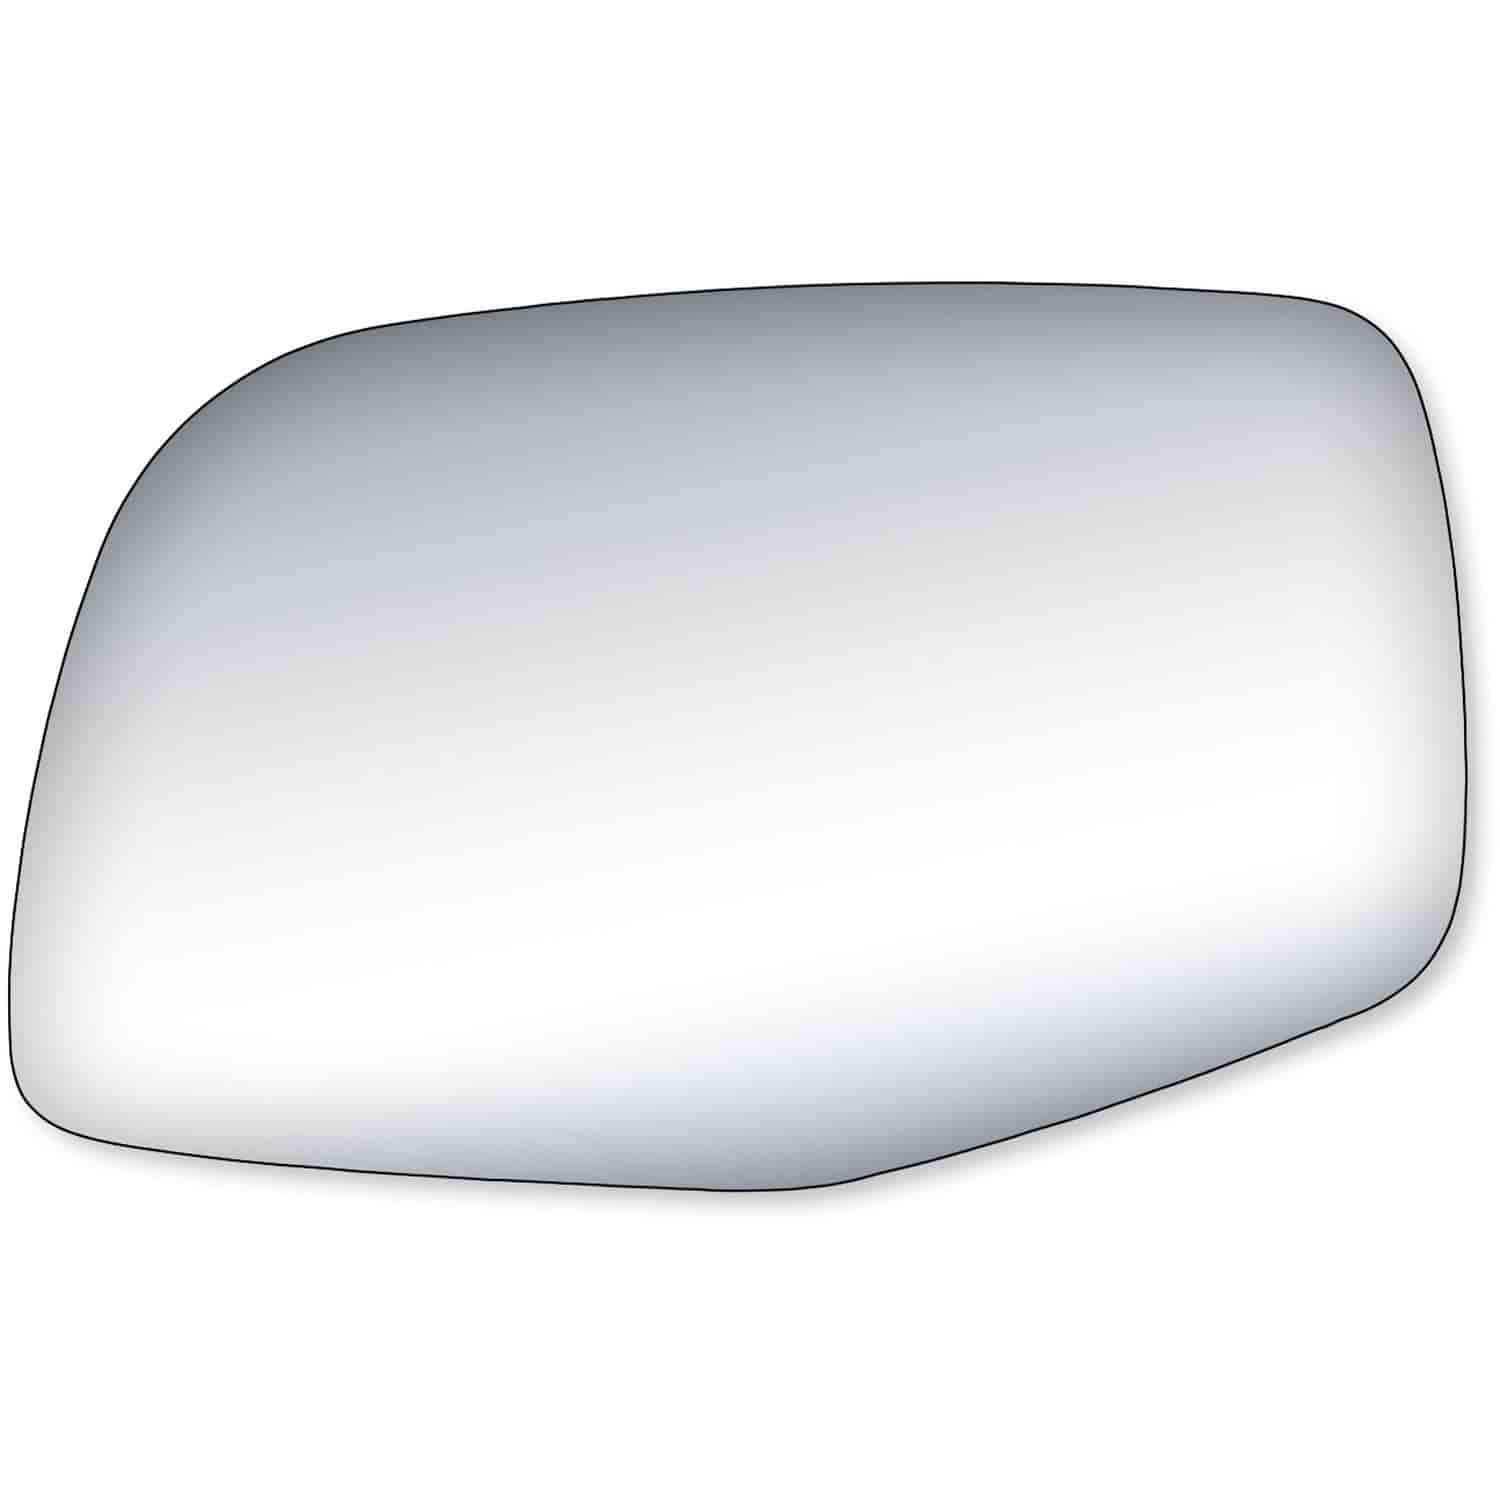 Replacement Glass for 90-97 Aerostar the glass measures 5 1/8 tall by 8 3/16 wide and 8 5/16 diagona